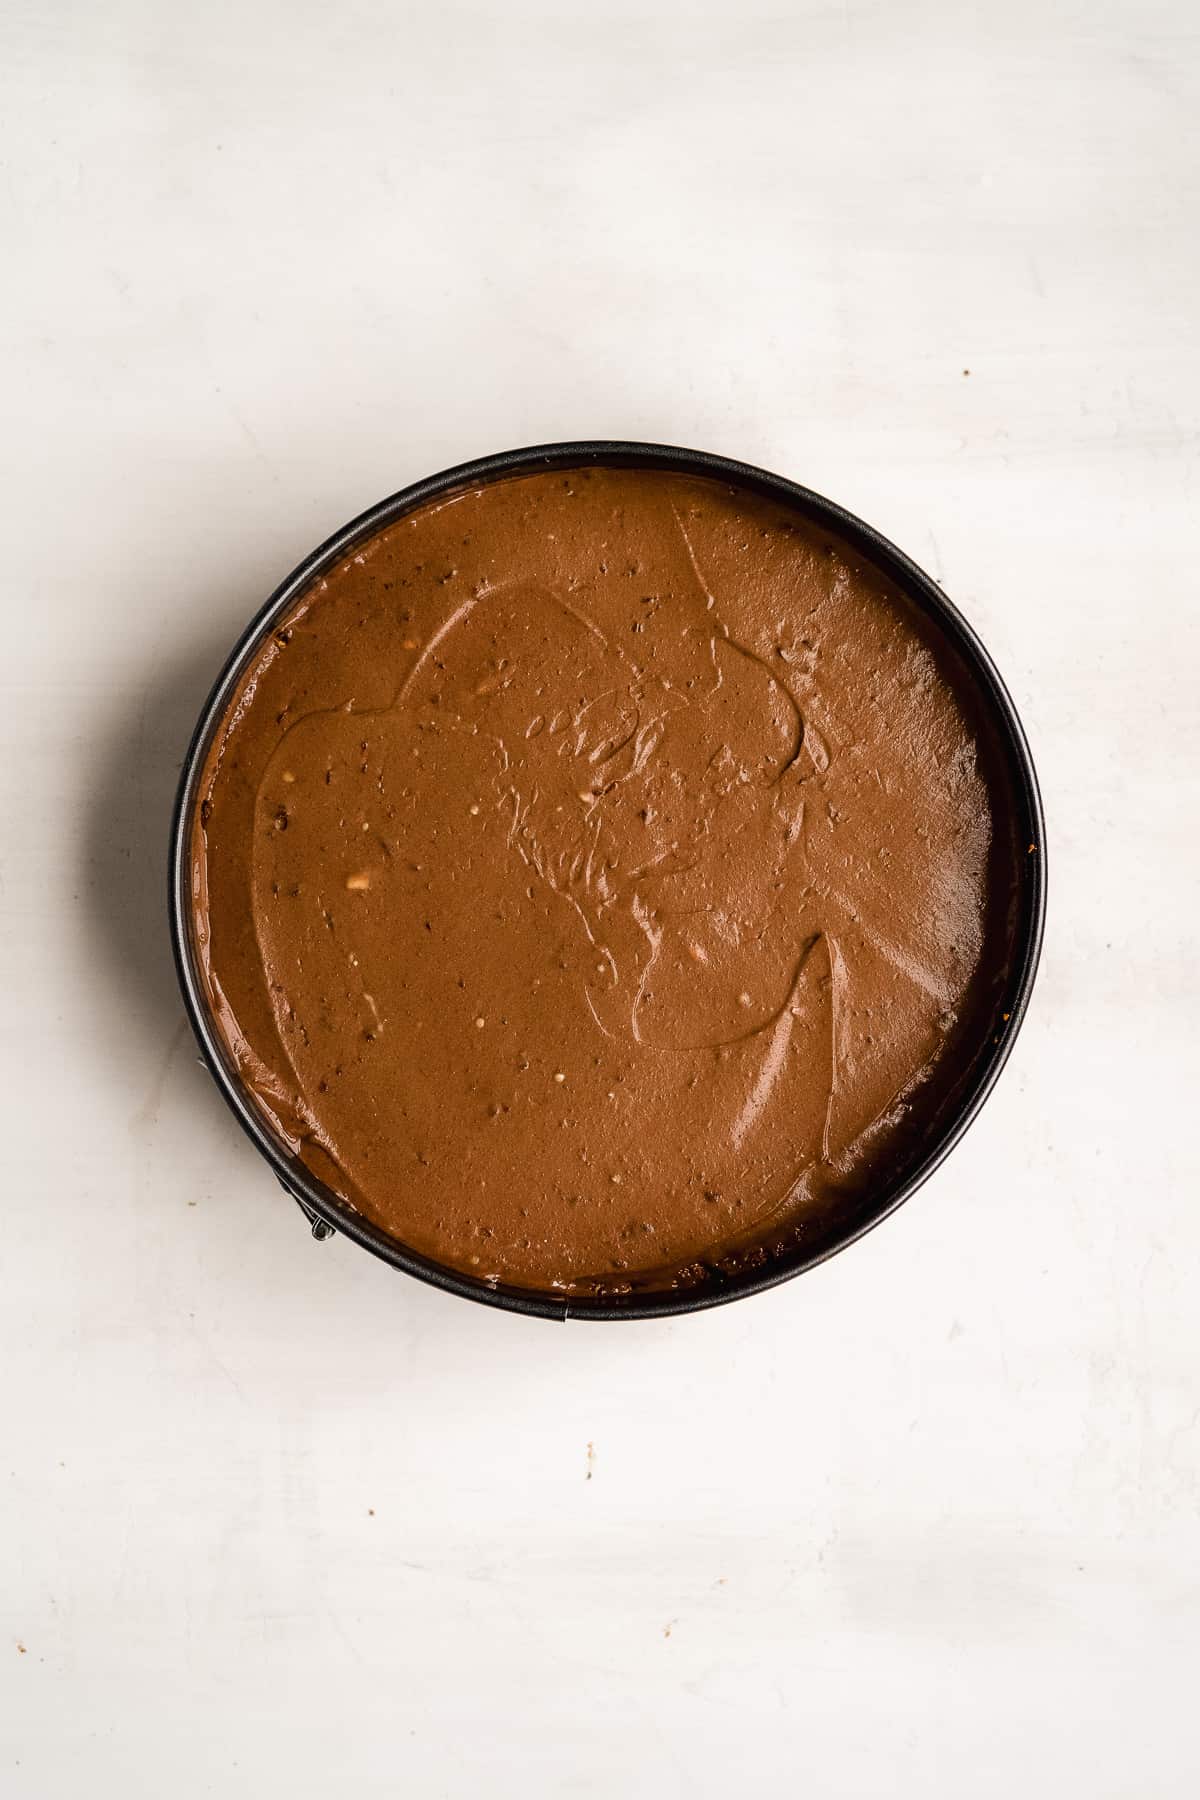 Chocolate cheesecake batter poured into a chocolate crust.